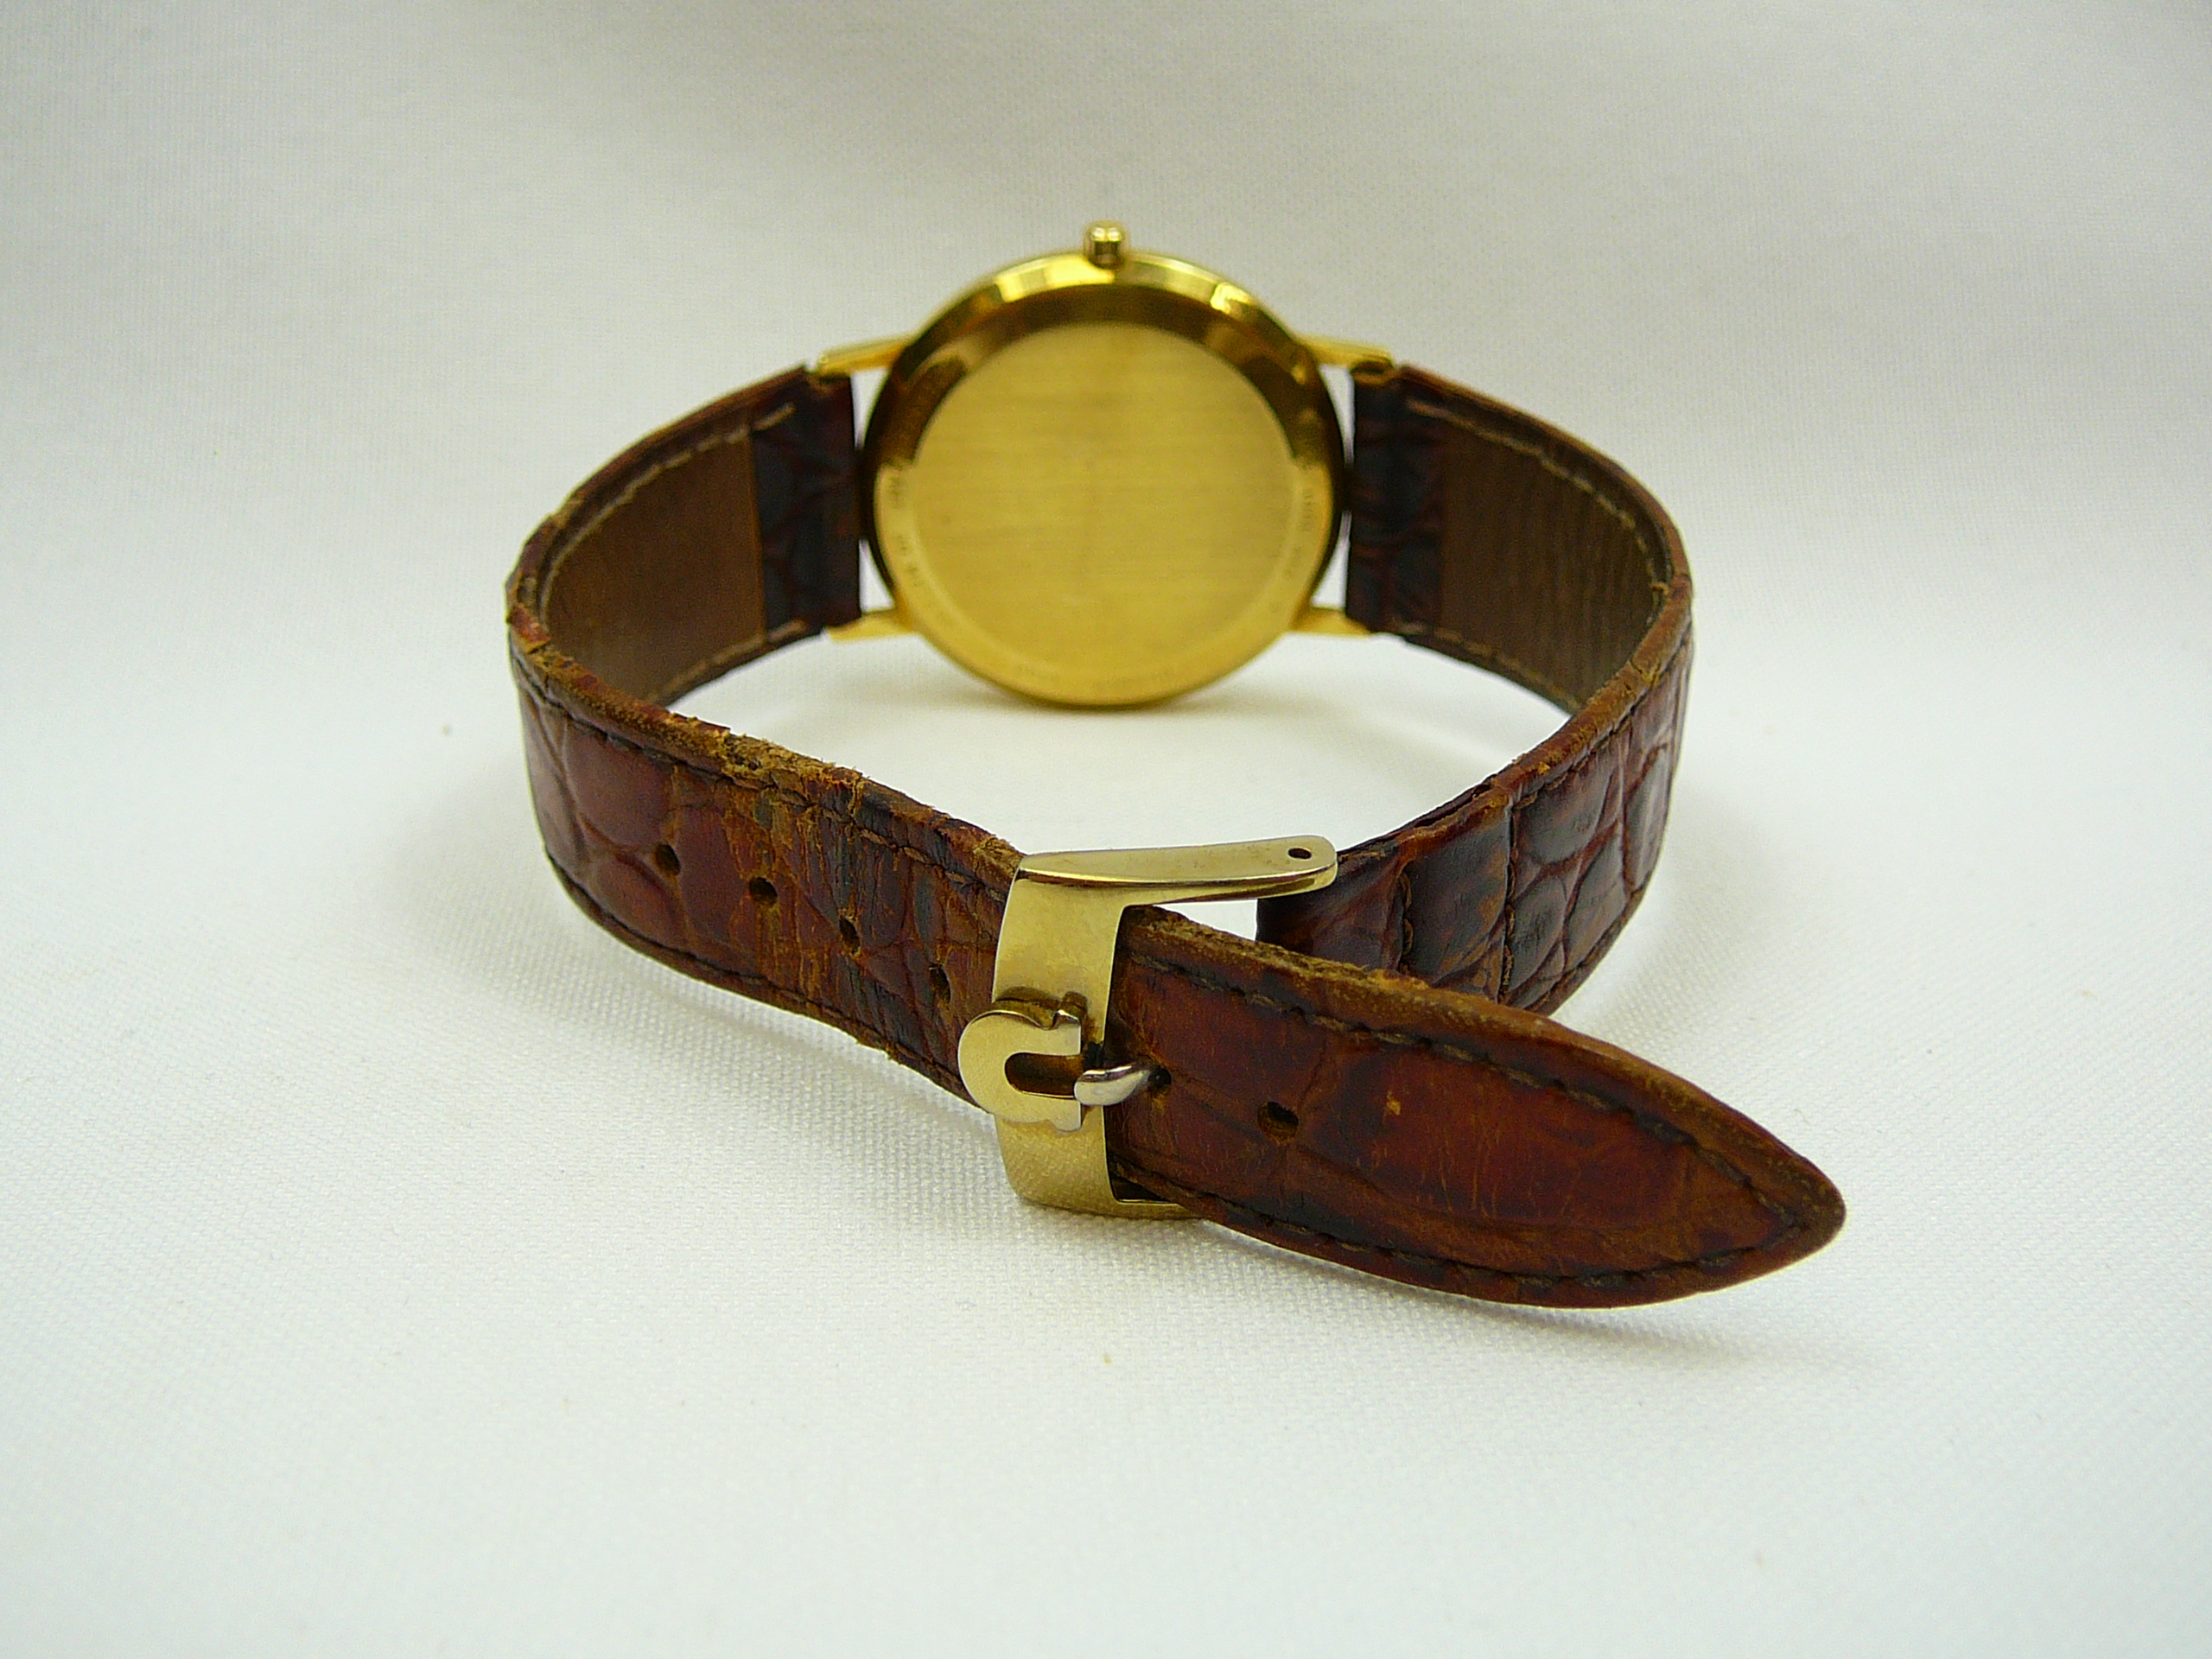 Gents gold Omega Wristwatch - Image 3 of 3